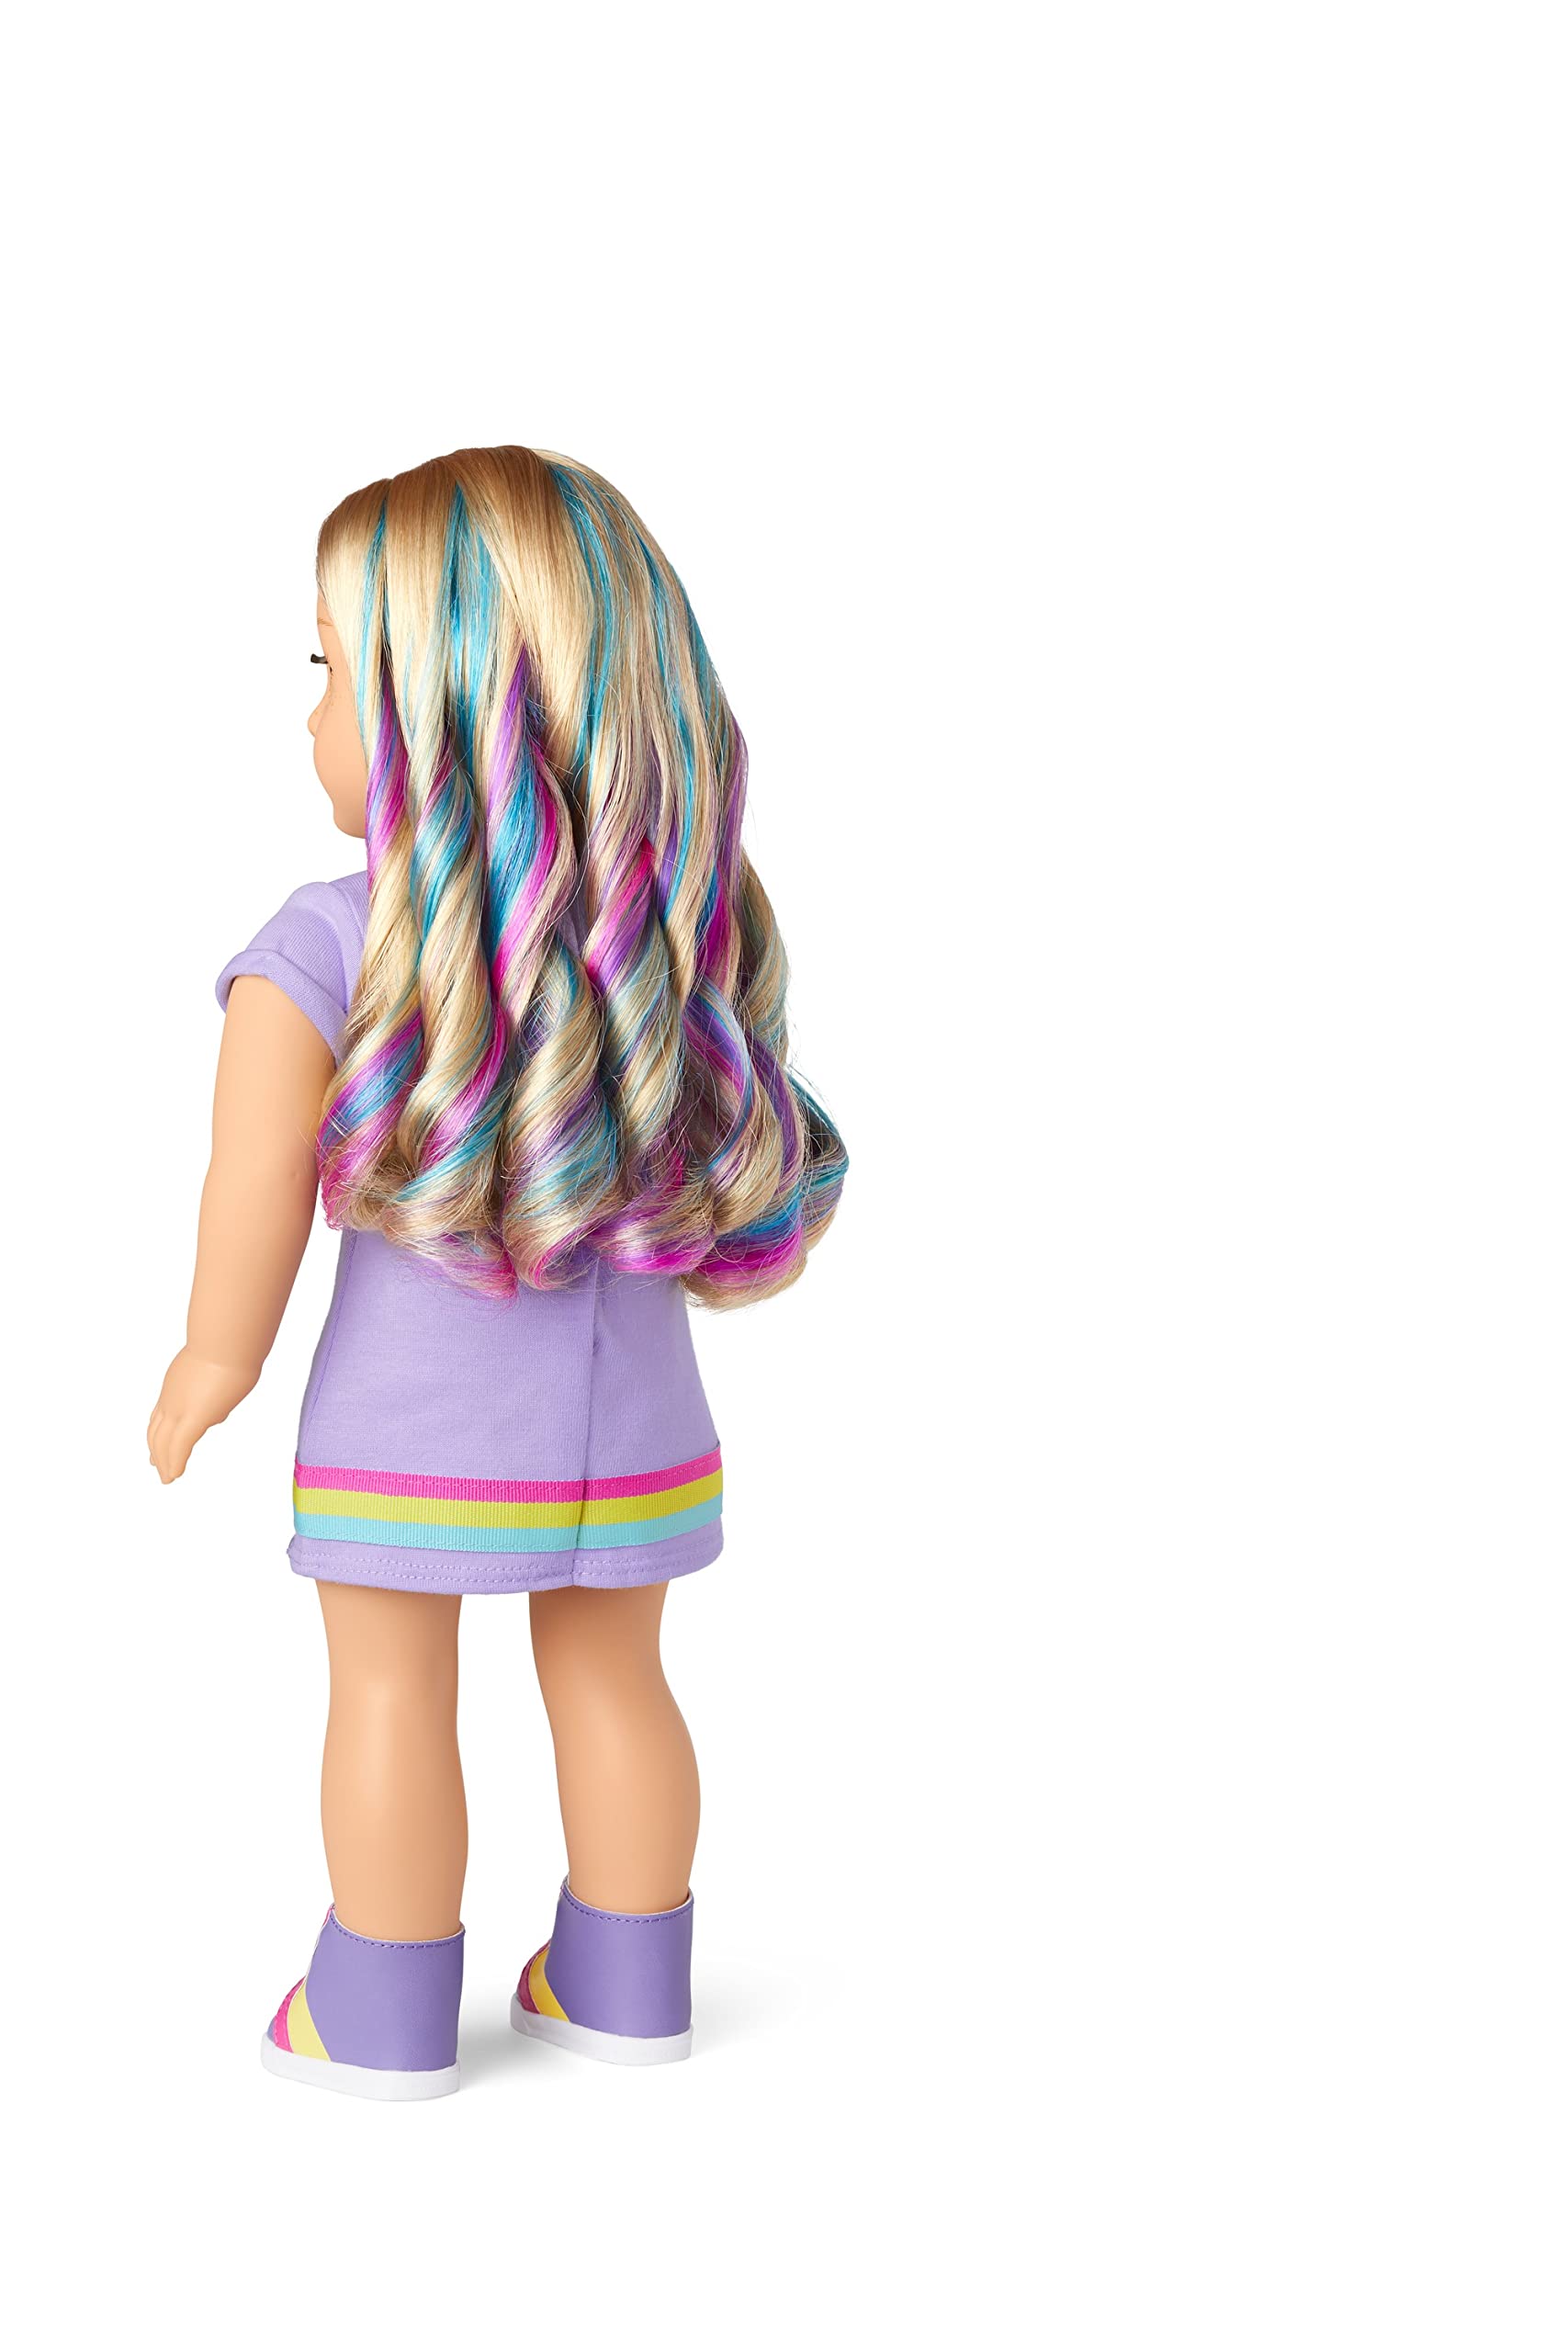 American Girl Truly Me 18-Inch Doll 110 with Light-Blue Eyes, Wavy Blonde Hair with Purple and Blue Highlights, Light Skin with Warm Olive Undertones, Purple Printed T-Shirt Dress